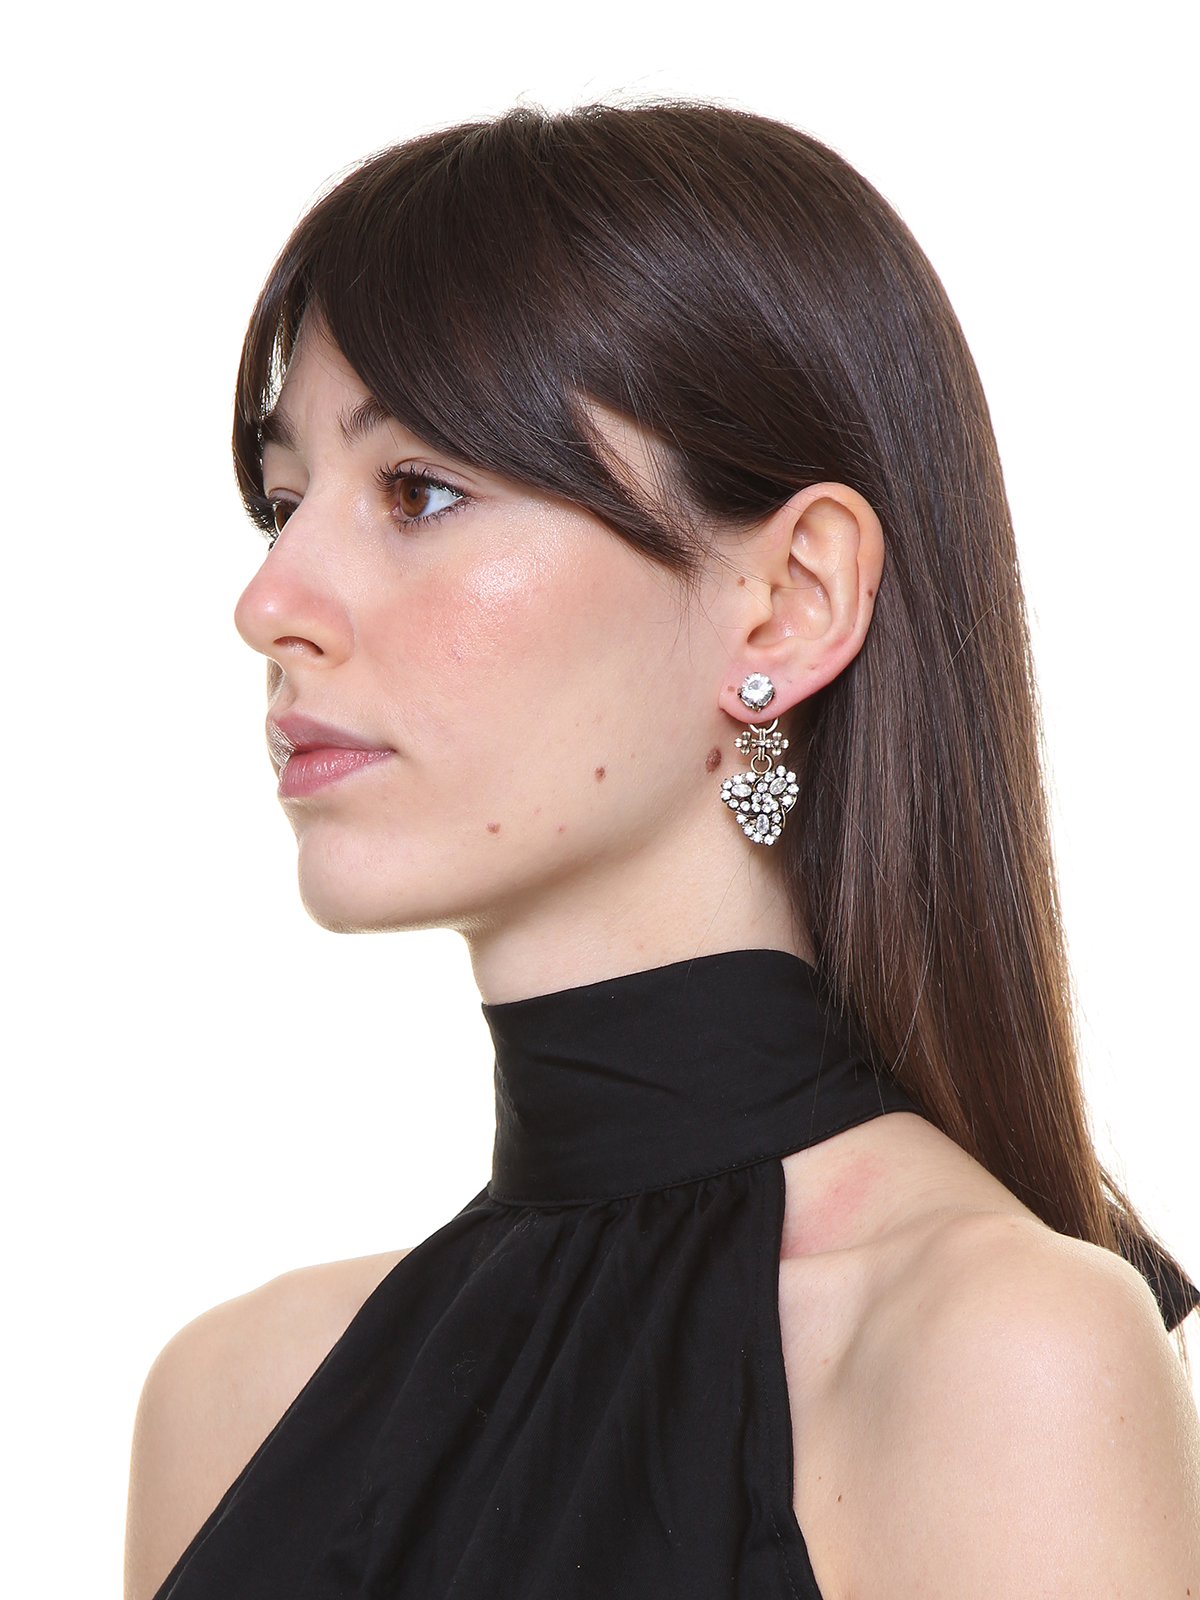 Pendent earrings with crystal petals